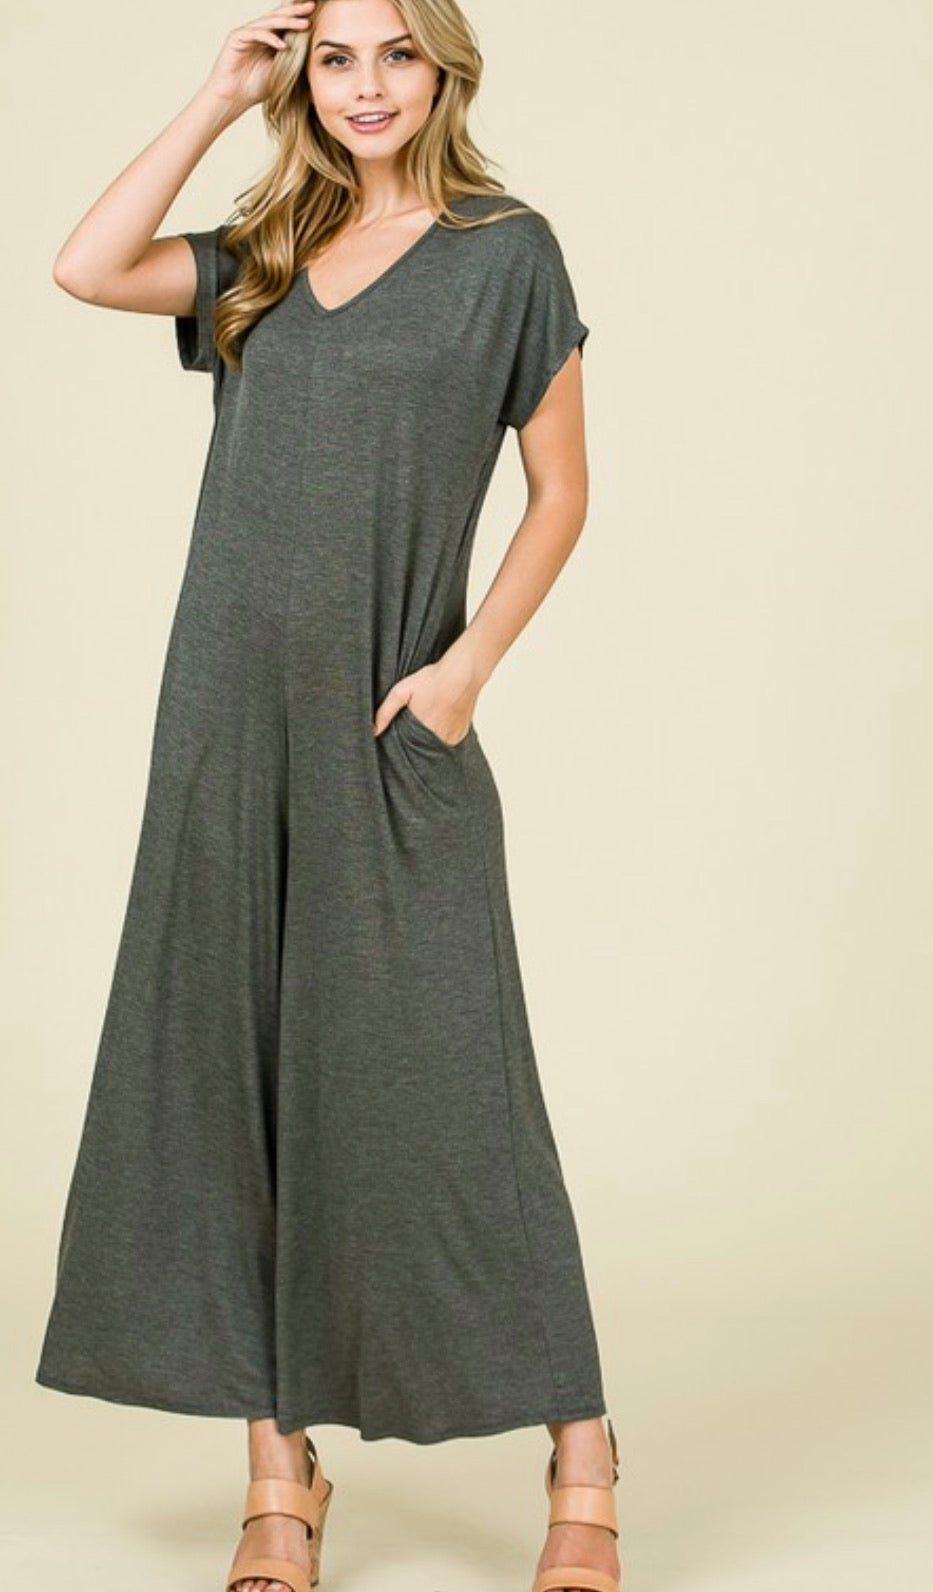 SHORT SLEEVE SOLID JUMPSUIT WITH SIDE POCKETS